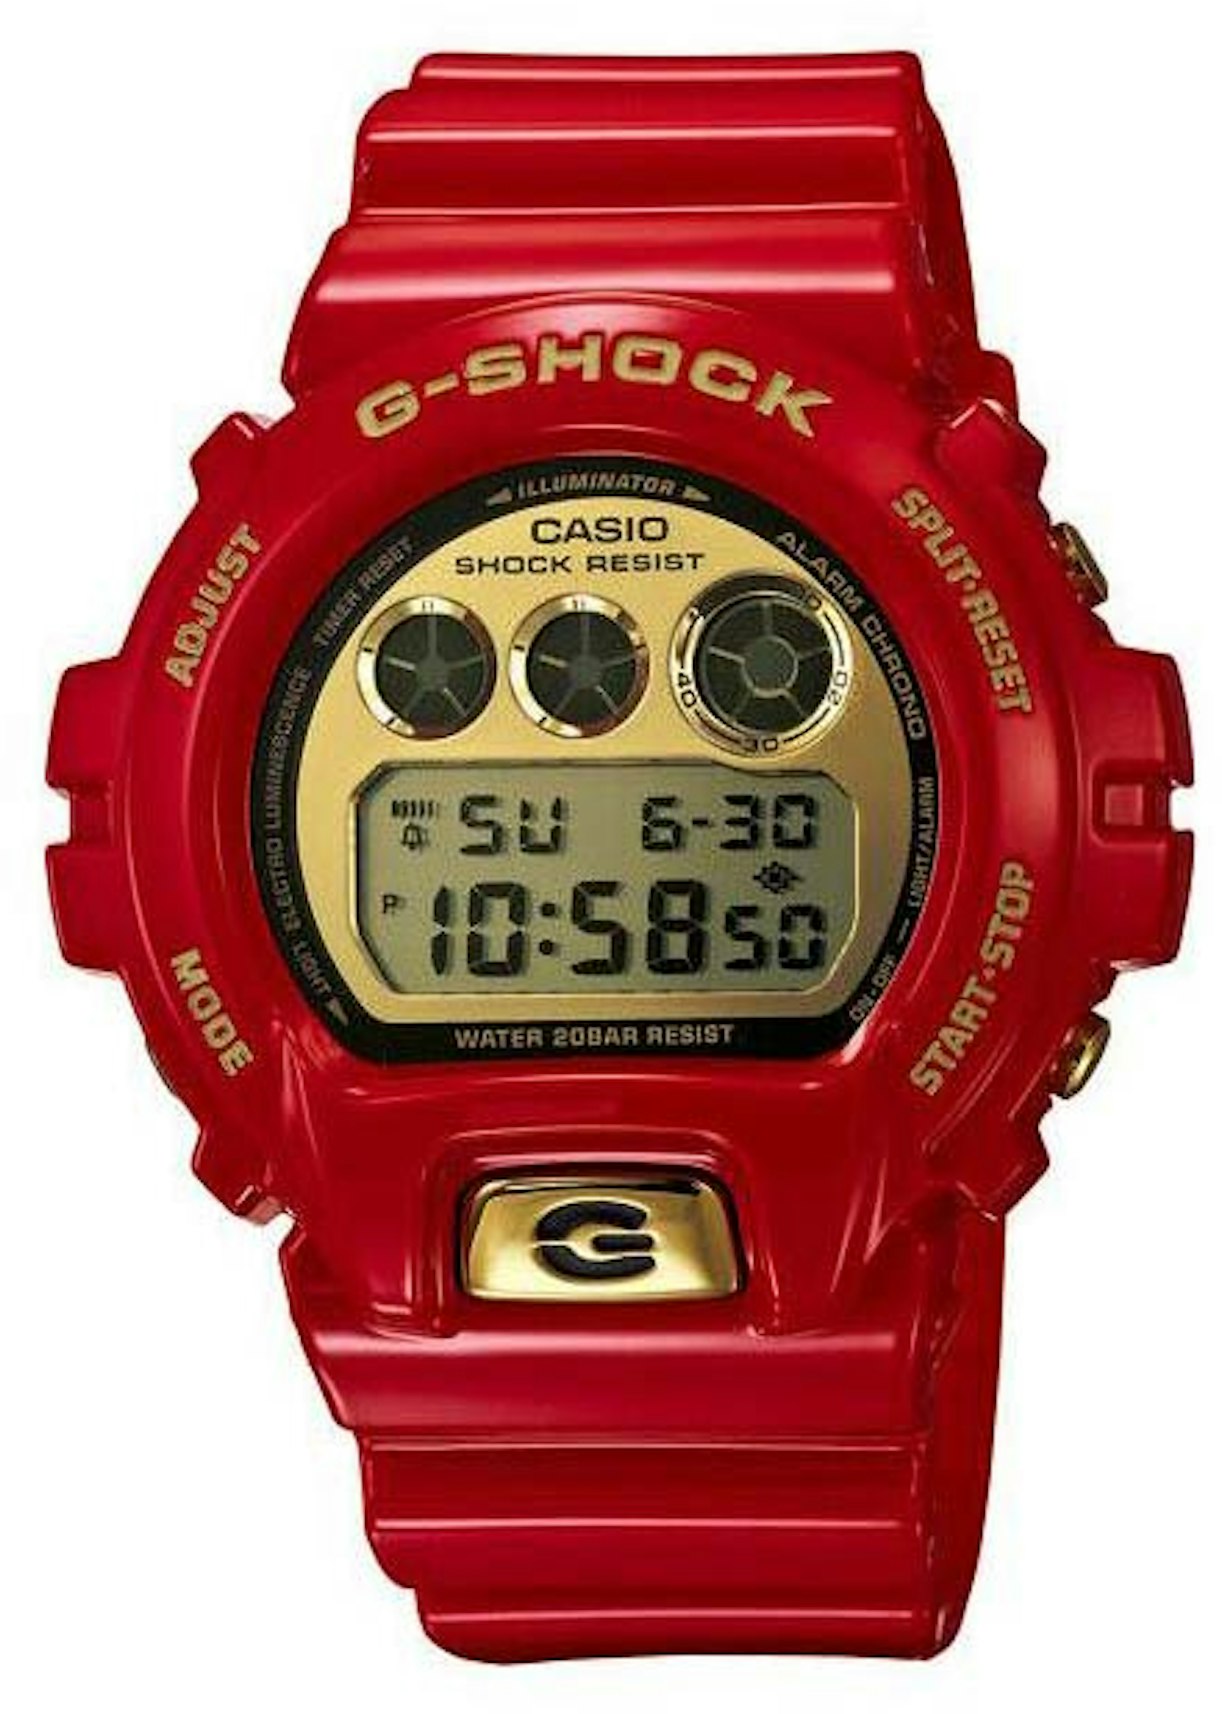 Casio G-Shock Anniversary DW-6930A-4 - 48mm in Resin JP